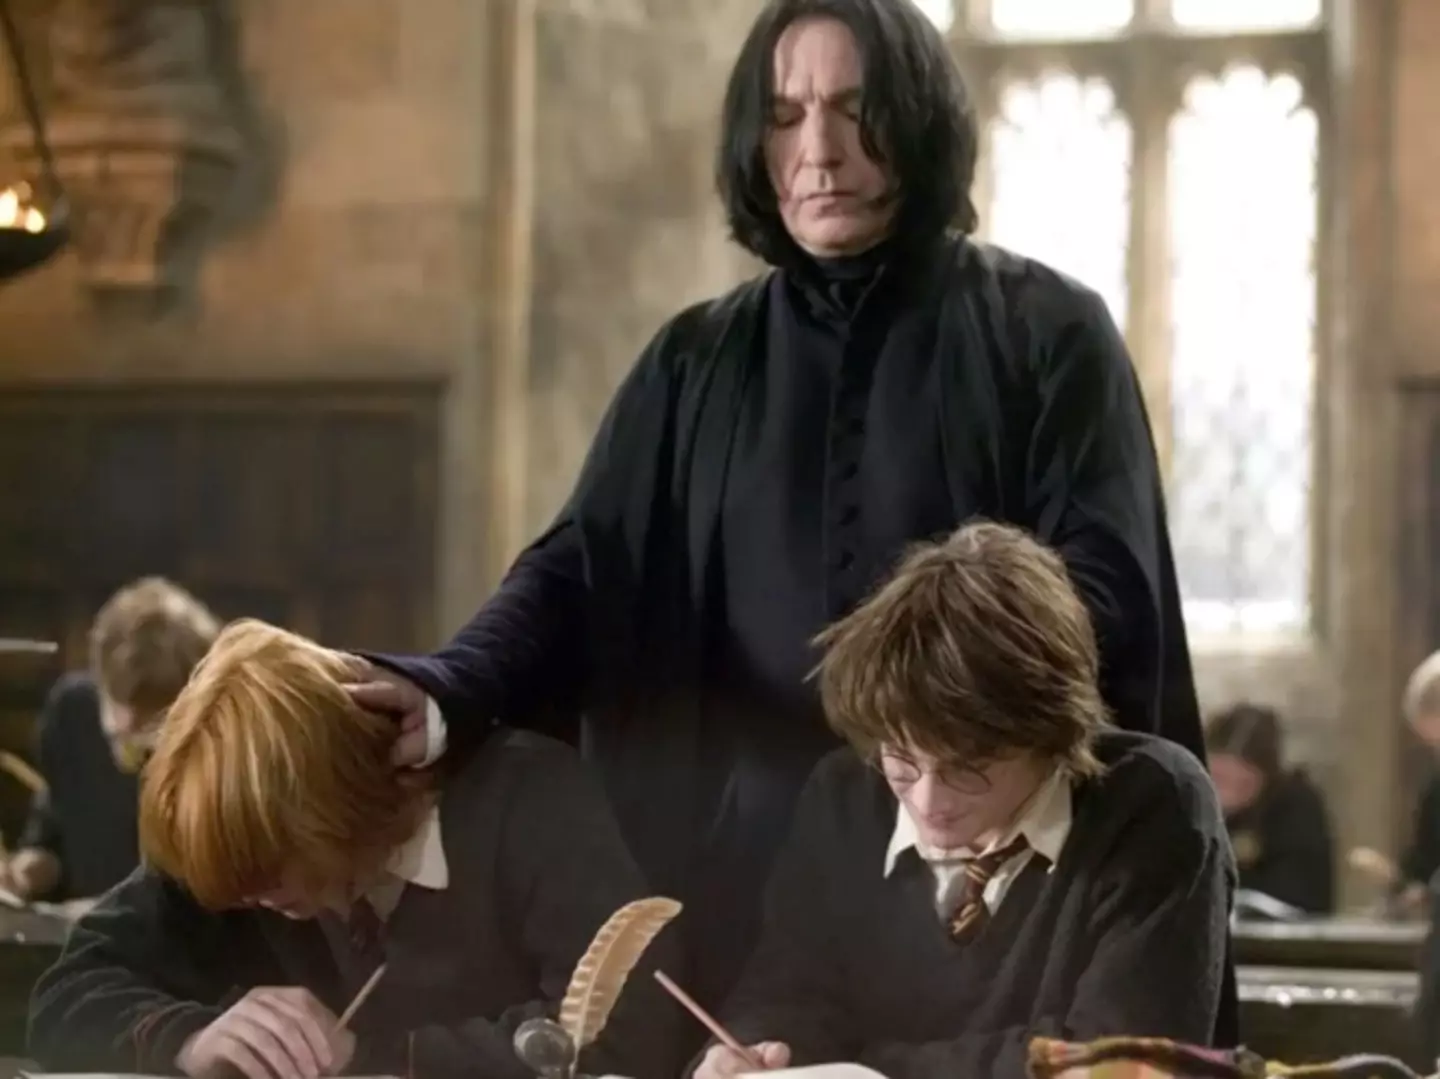 Snape's relationship with Harry Potter was complicated, to say the least.